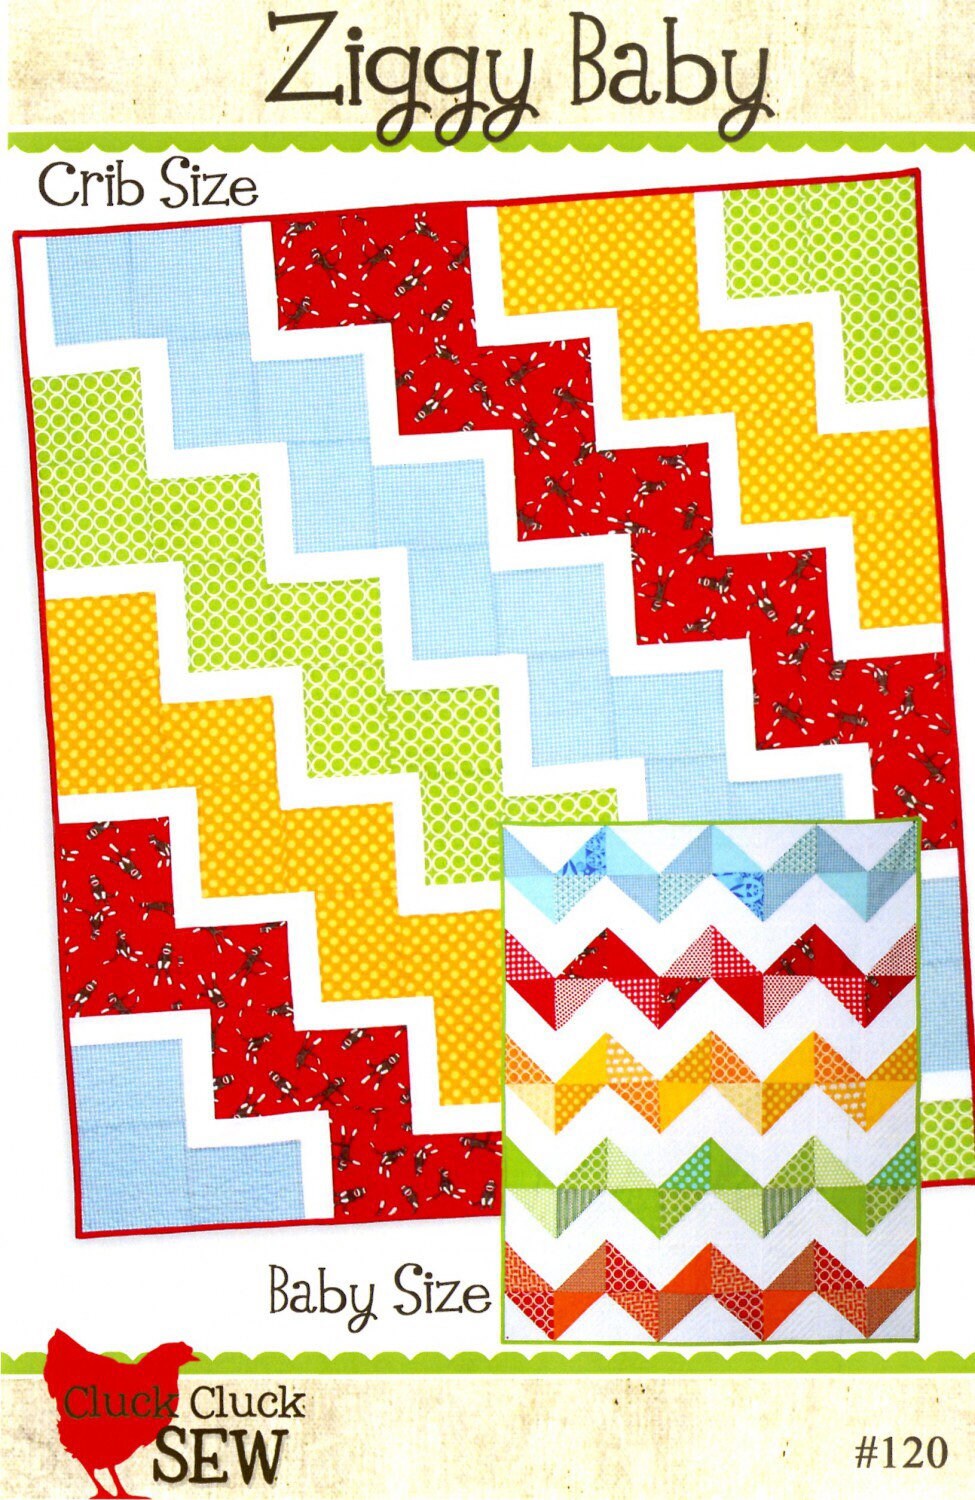 Ziggy Baby Quilt Pattern - Cluck Cluck Sew - Fat Quarter Friendly - 2 patterns included